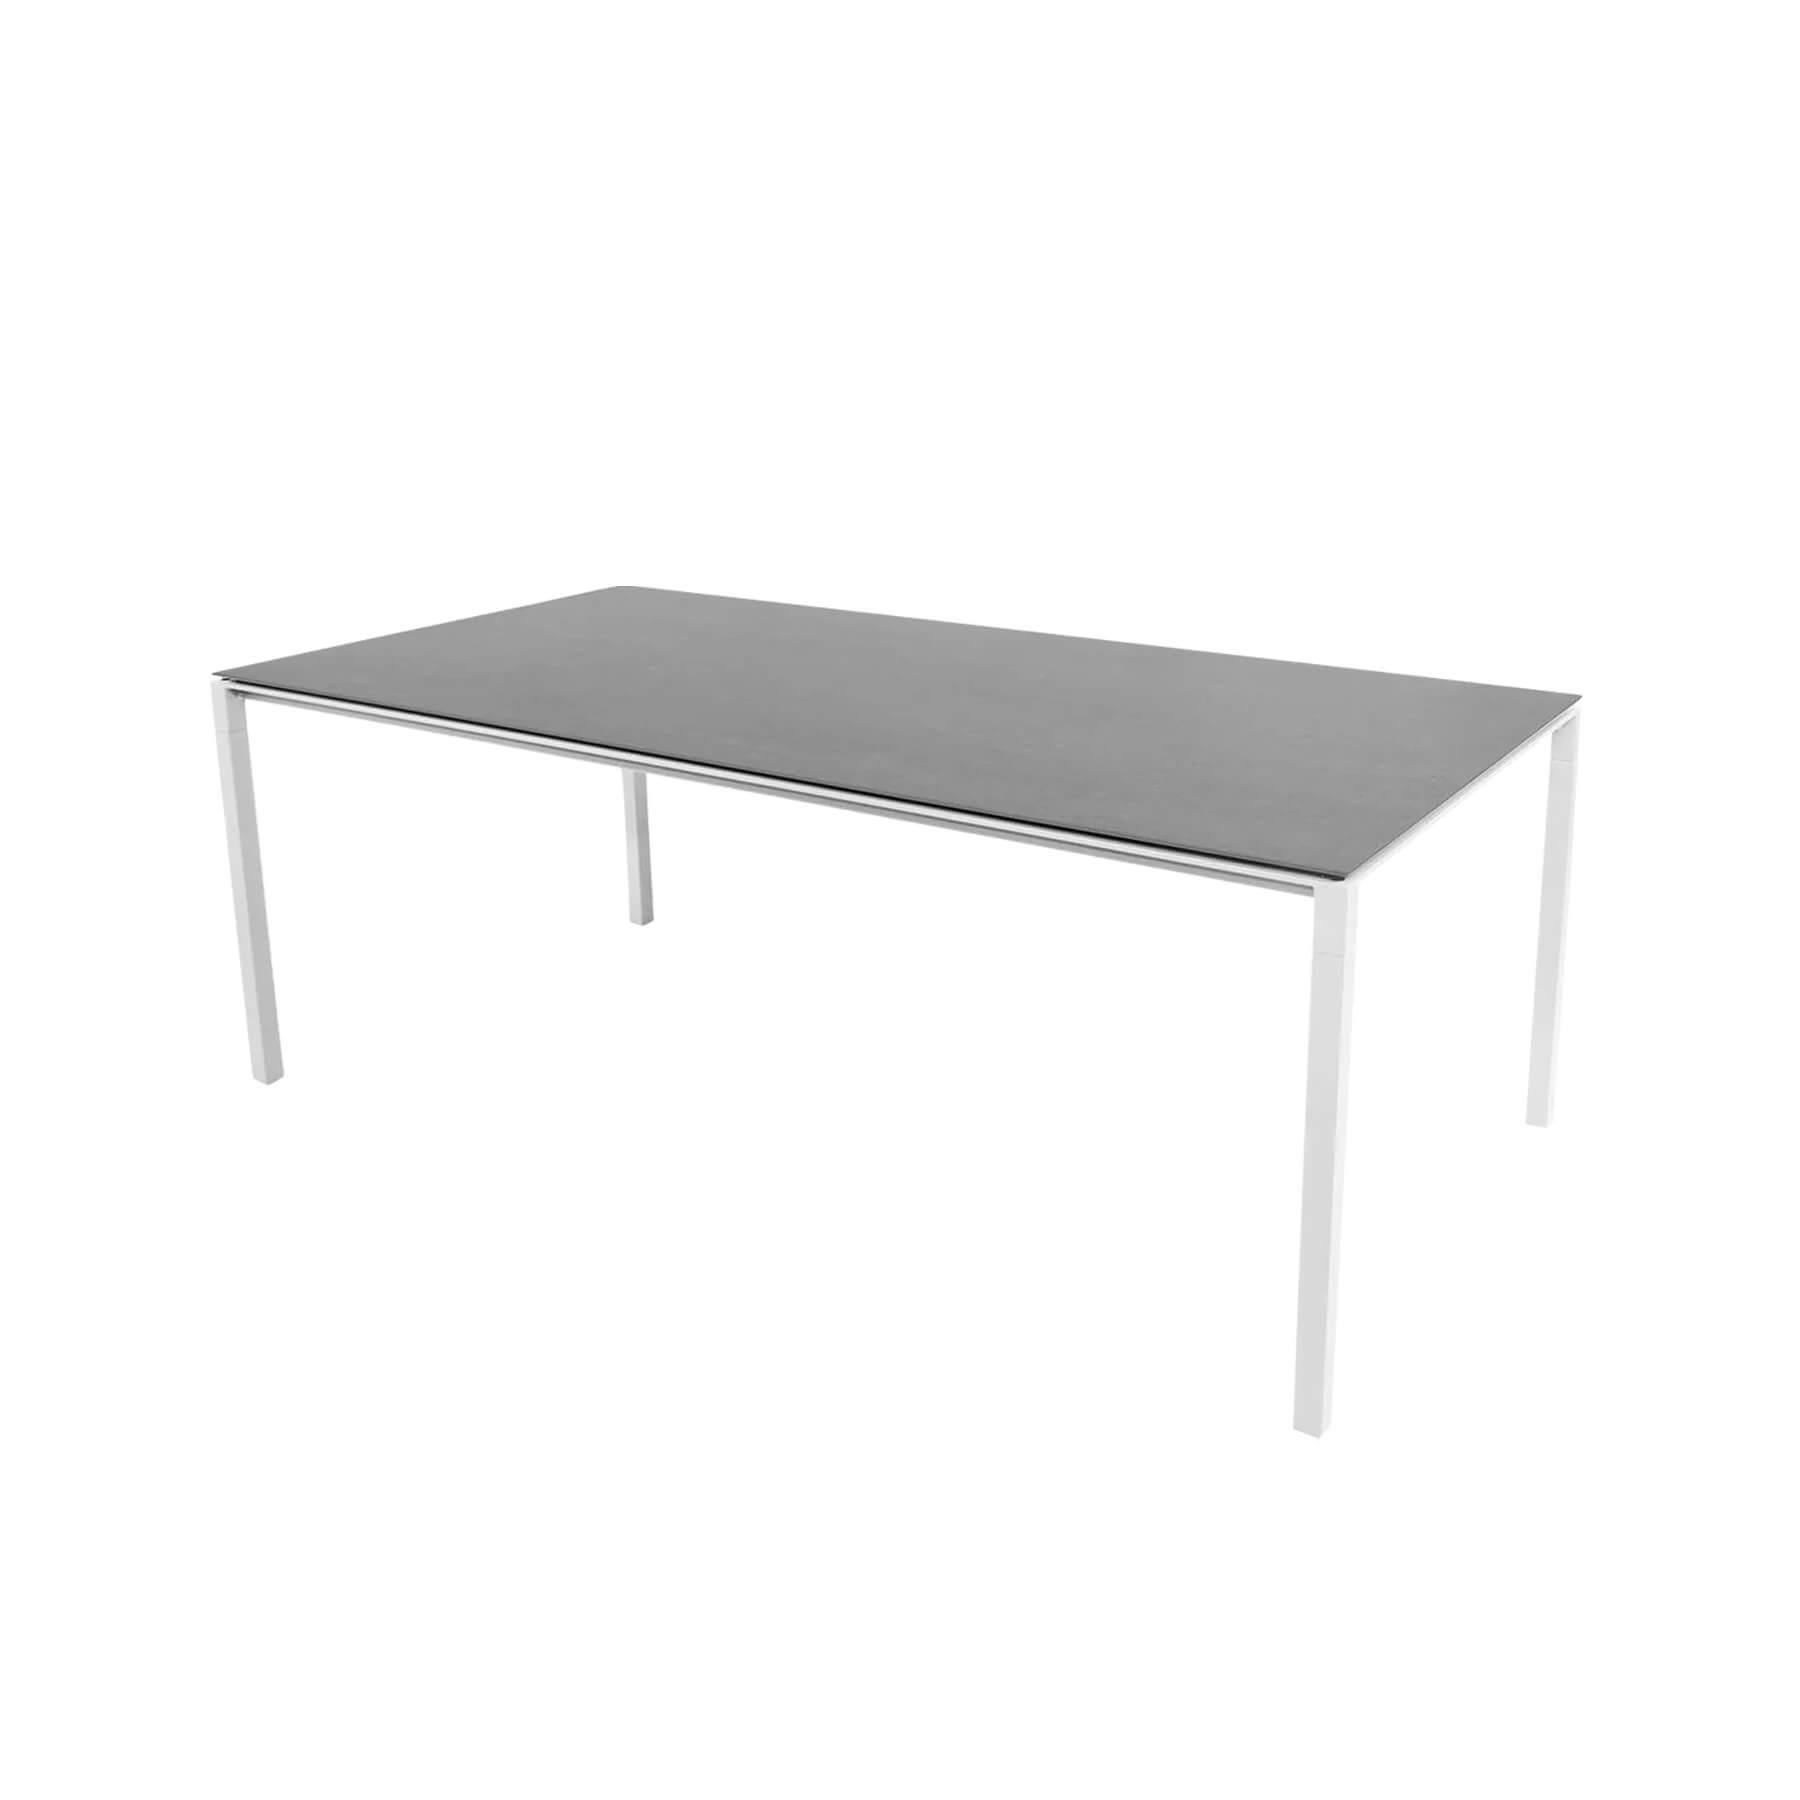 Caneline Pure Outdoor Dining Table Large Ceramic Basalt Top White Legs Grey